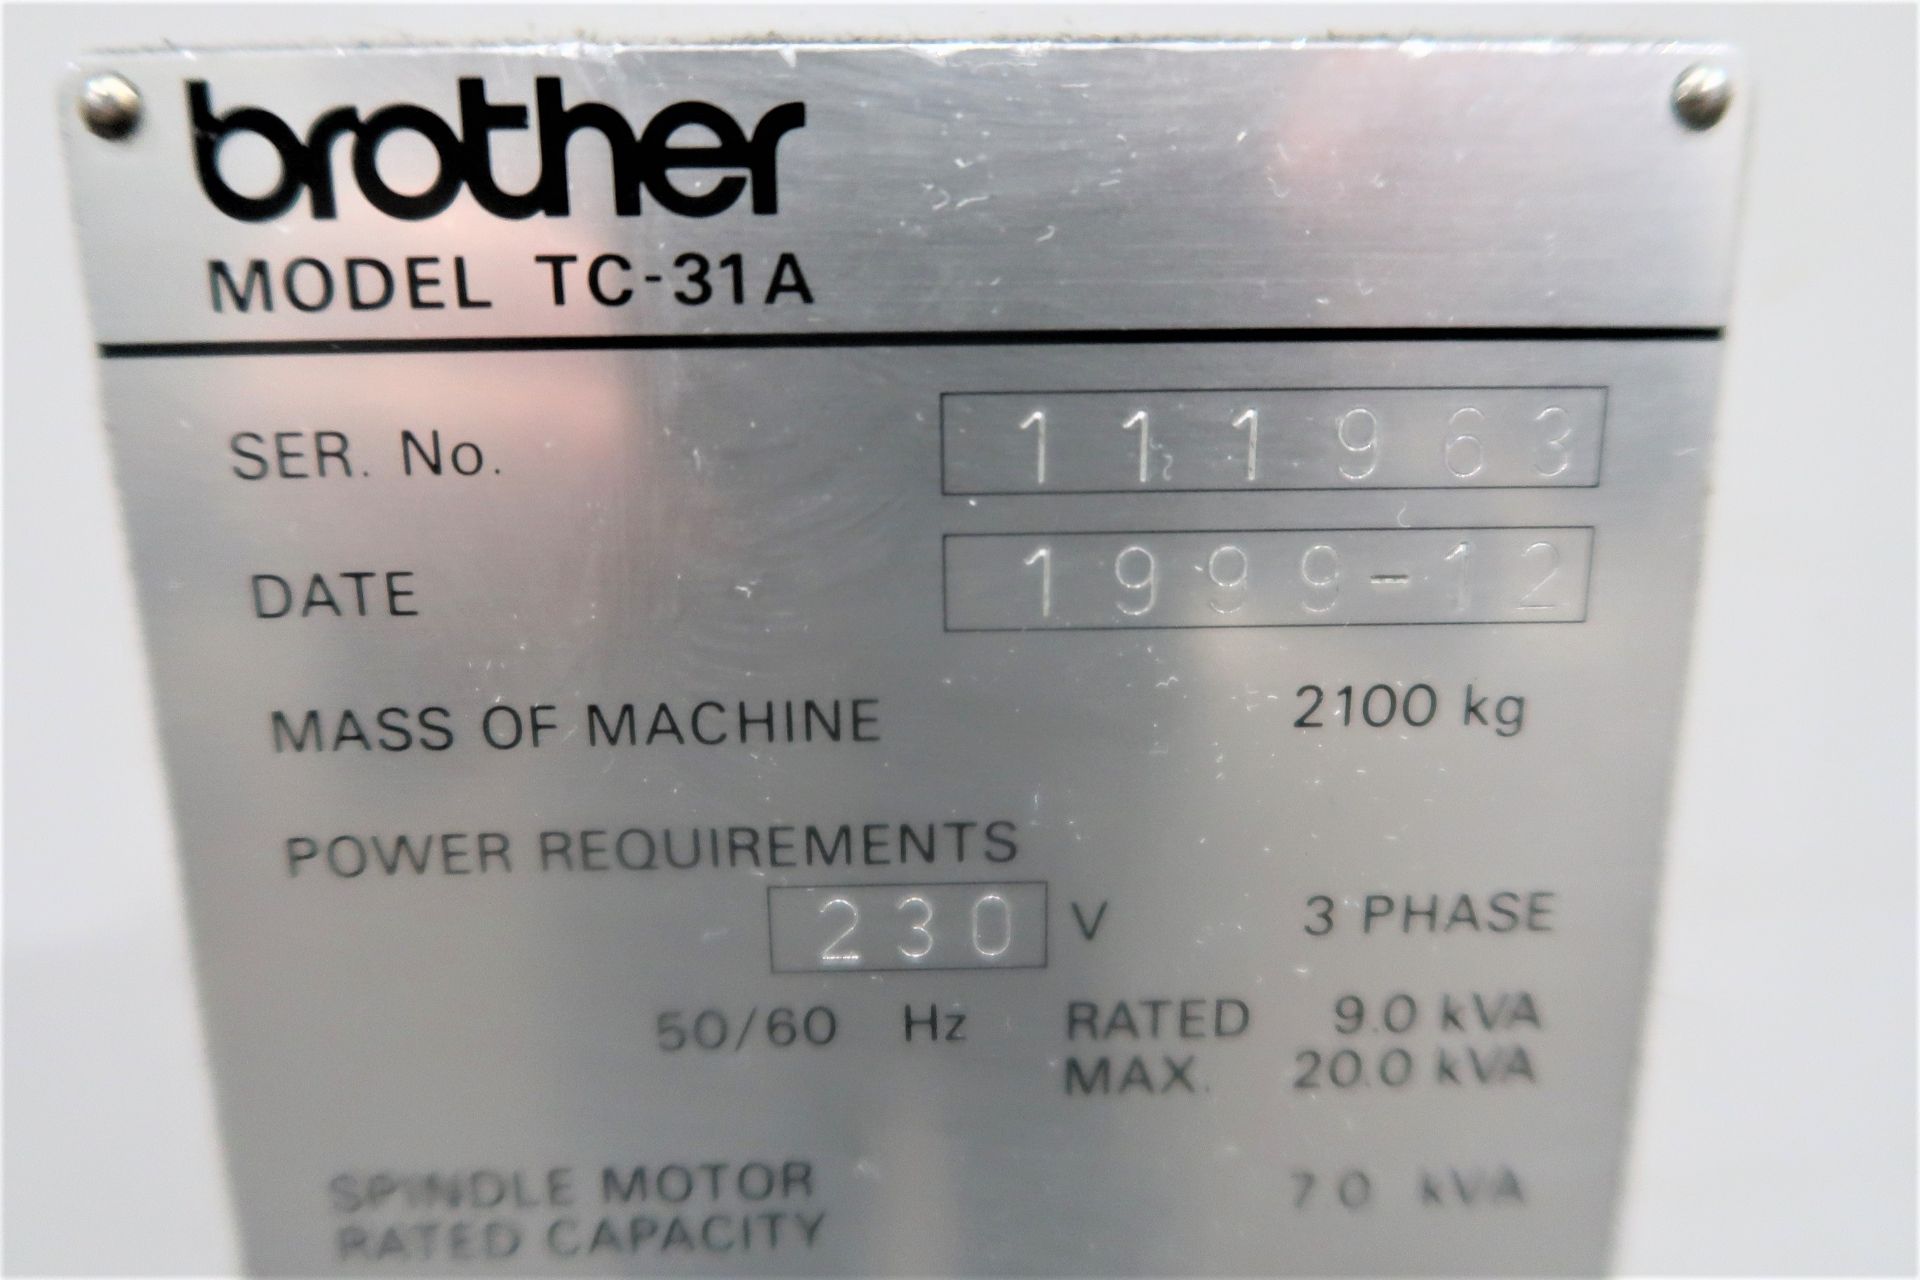 Brother TC-31A High Speed CNC Drill/Tap with 4th Axis, S/N 111963, New 2000 - Image 8 of 8